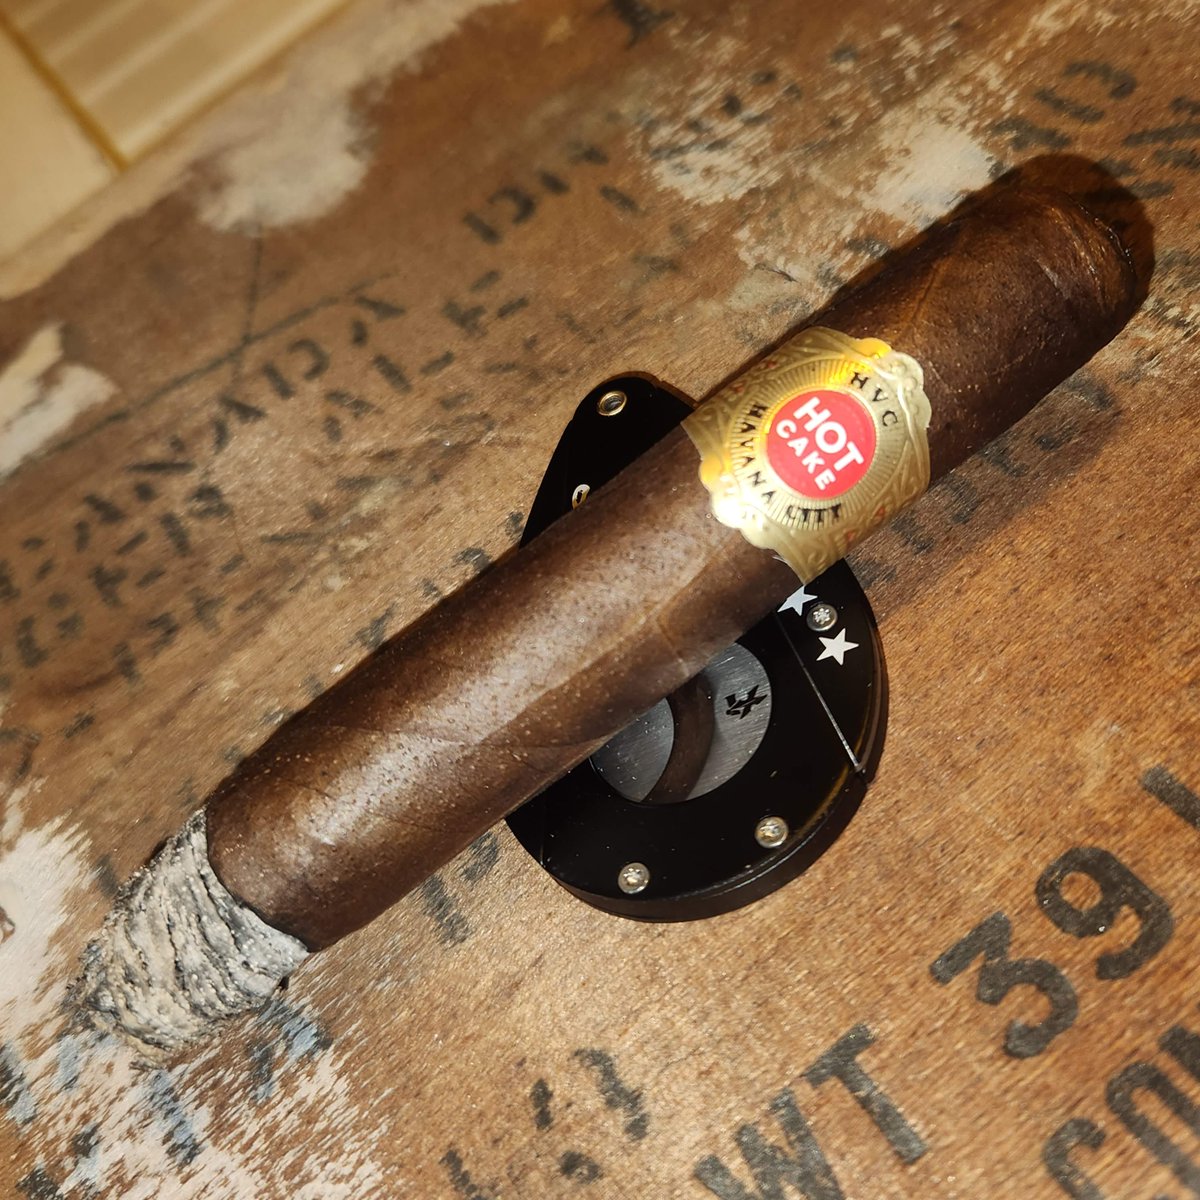 John's enjoying a nice @HVCCigars Hot Cake today. Medium-bodied, dark-leaf flavor of cocoa, coffee, and rich spices. Mexican San Andres Maduro wrapper over three different varietals of Corojo 2006 Maduro tobaccos in the blend’s core. #cigar #cigars